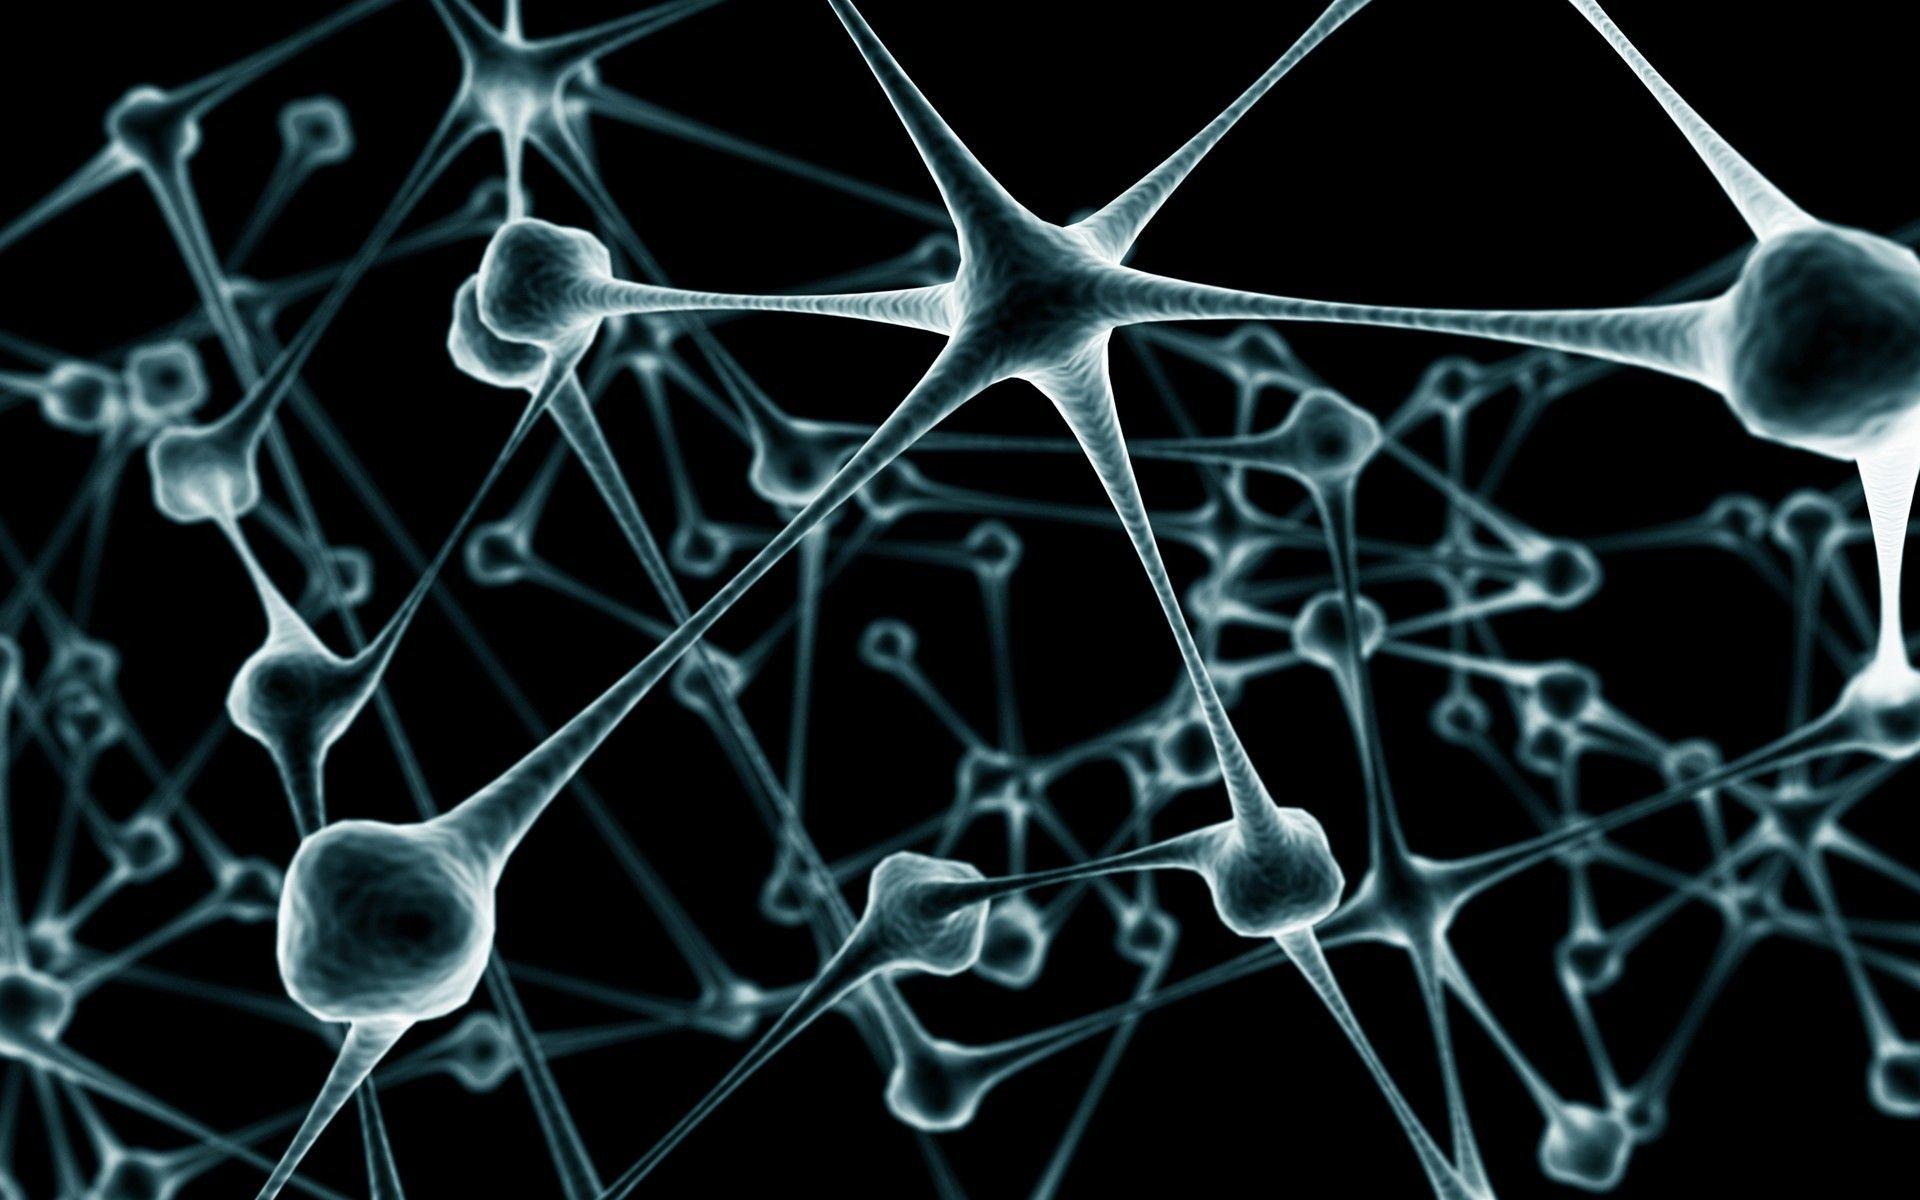 Contact neurons in the brain wallpaper and image